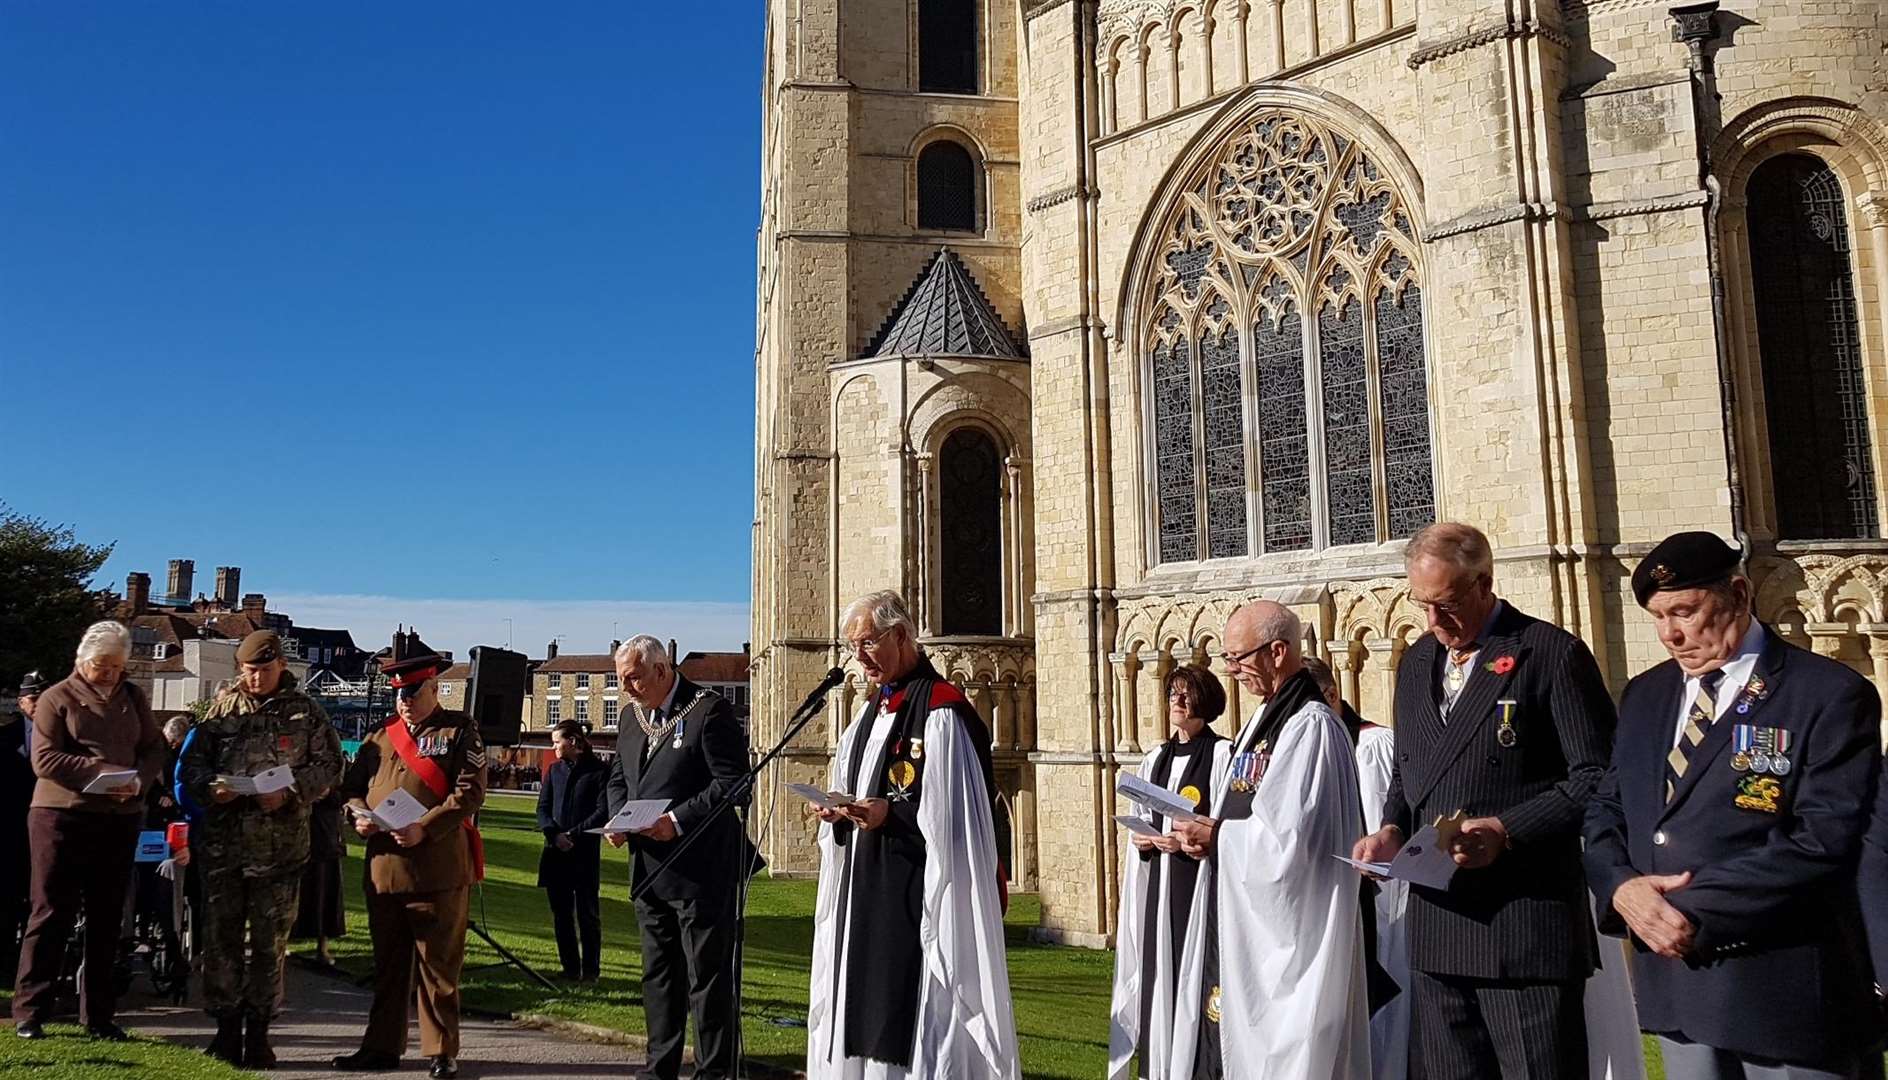 The Dean of Canterbury, the Very Reverend Dr Robert Willis, dedicating the Field of Remembrance